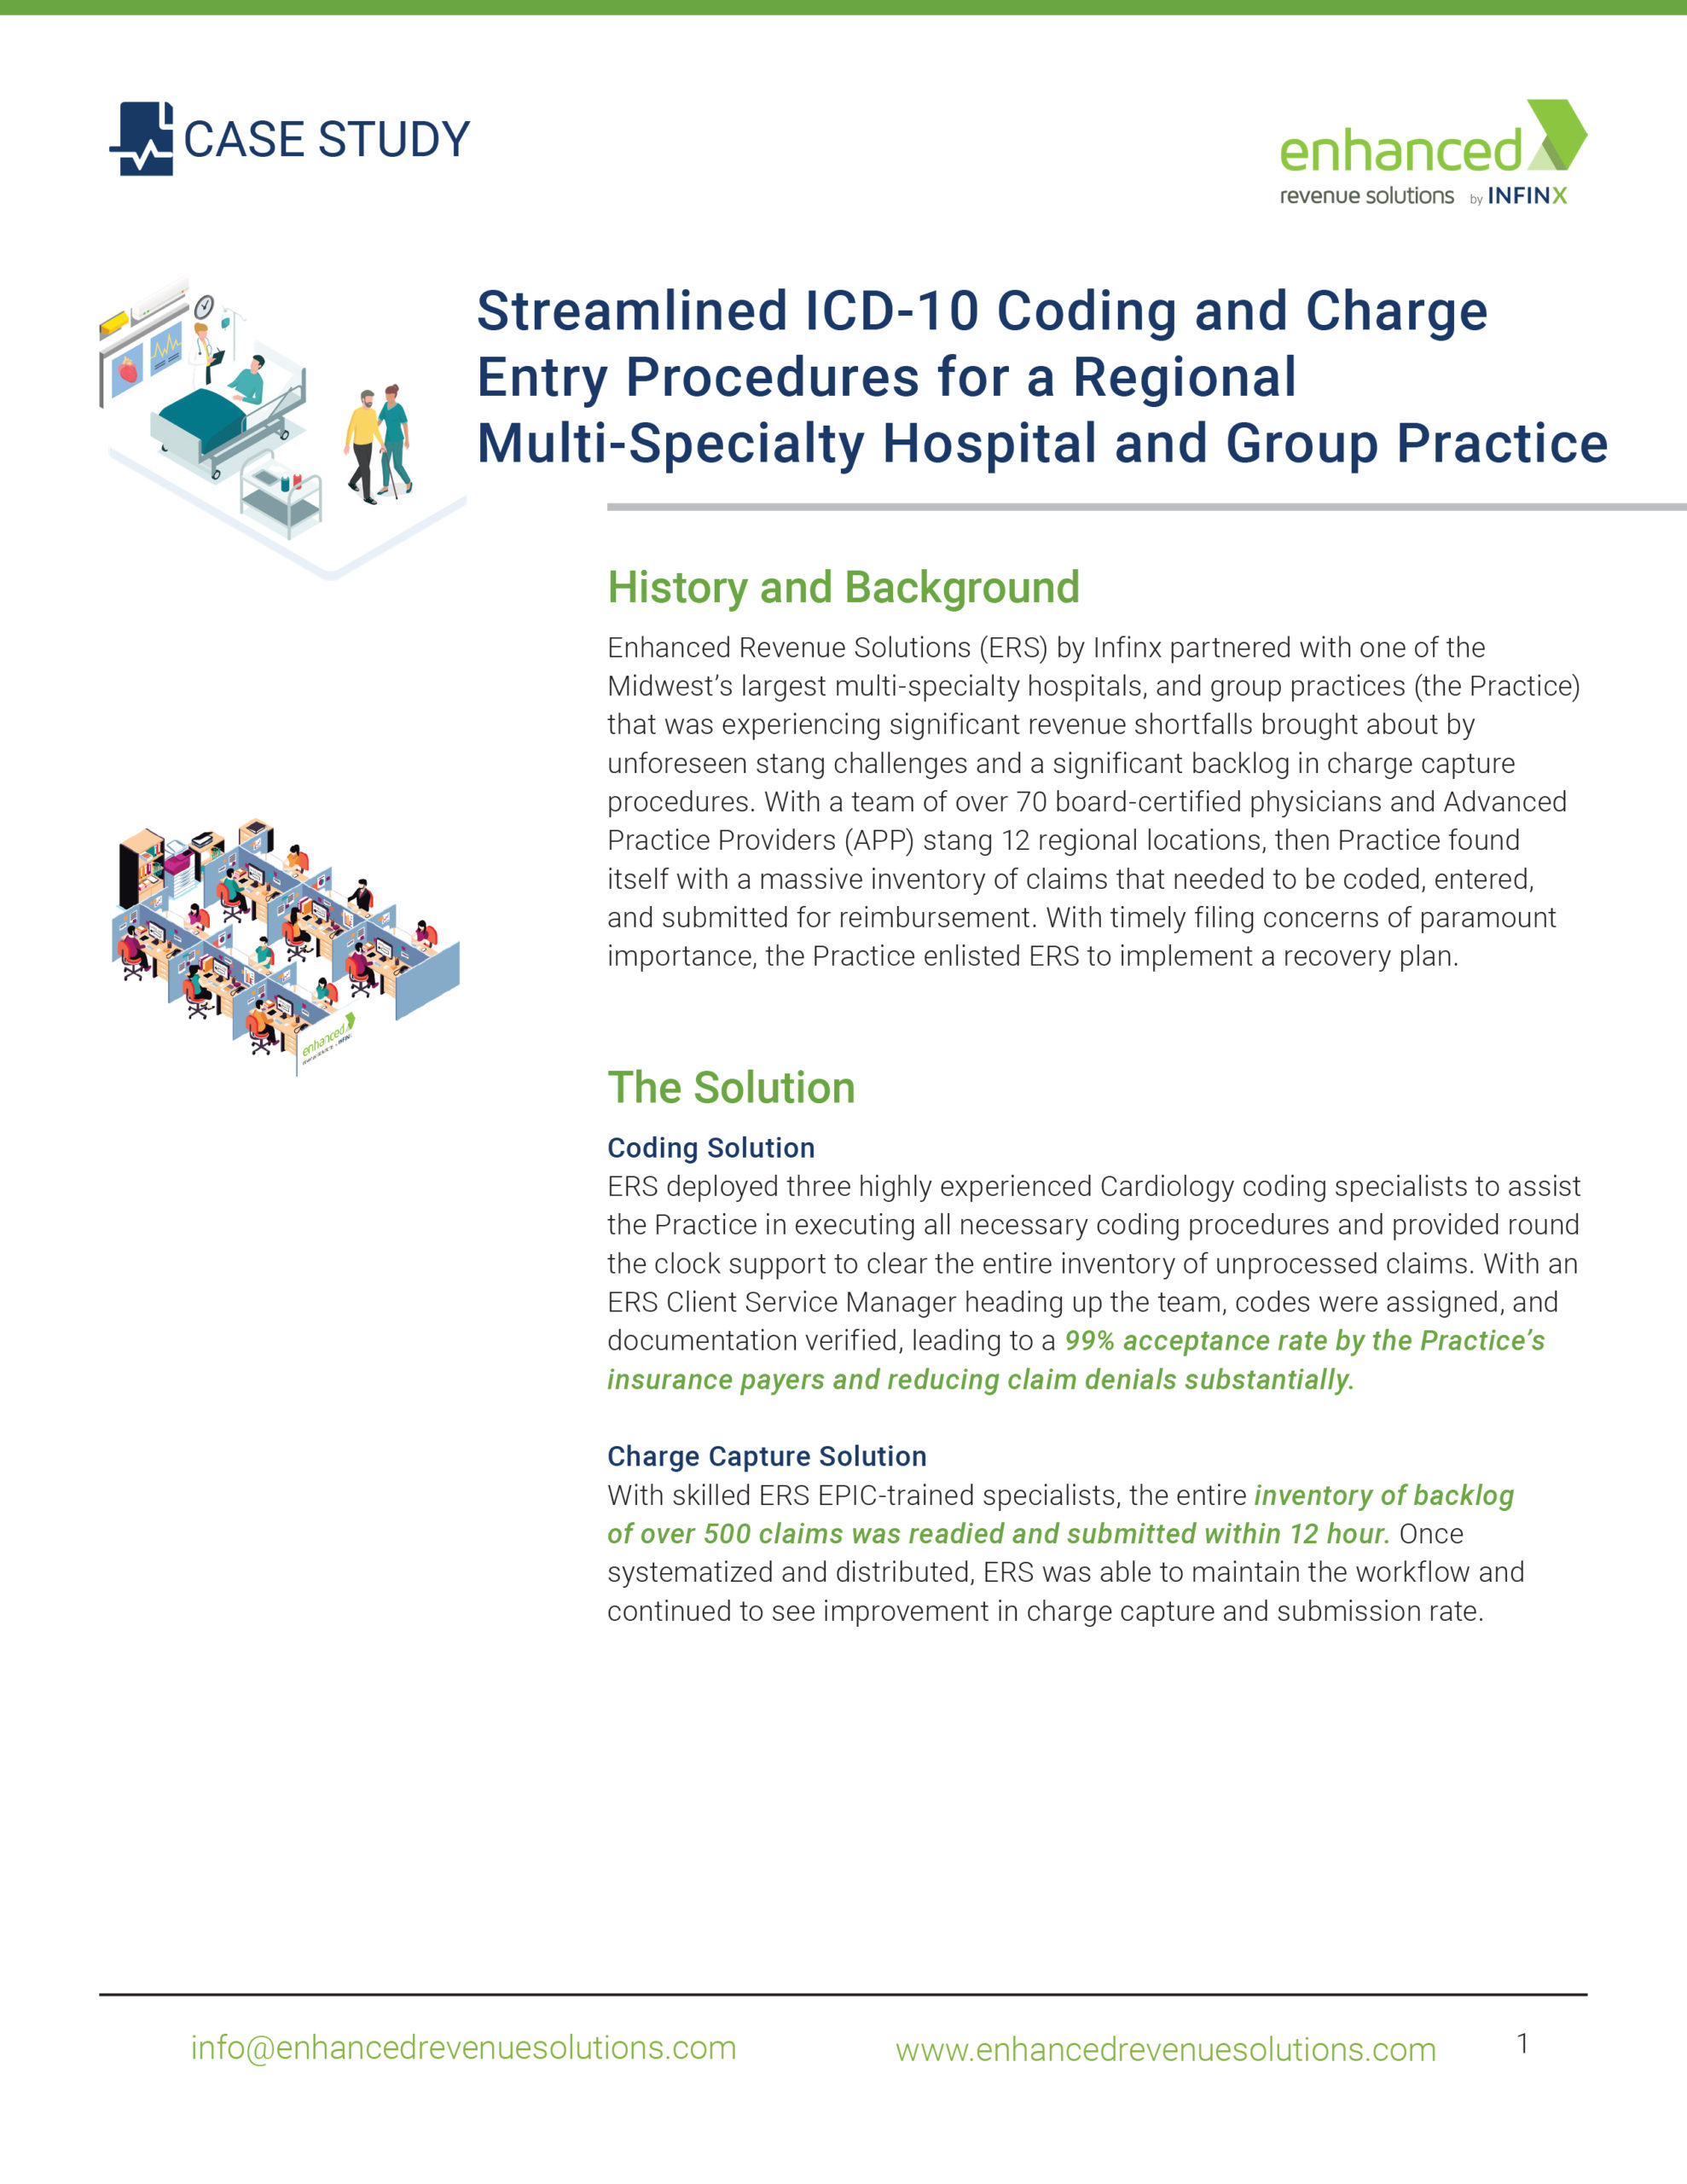 ERS by Infinx - Case Study - Streamlined ICD-10 Coding and Charge Entry Procedures - 1